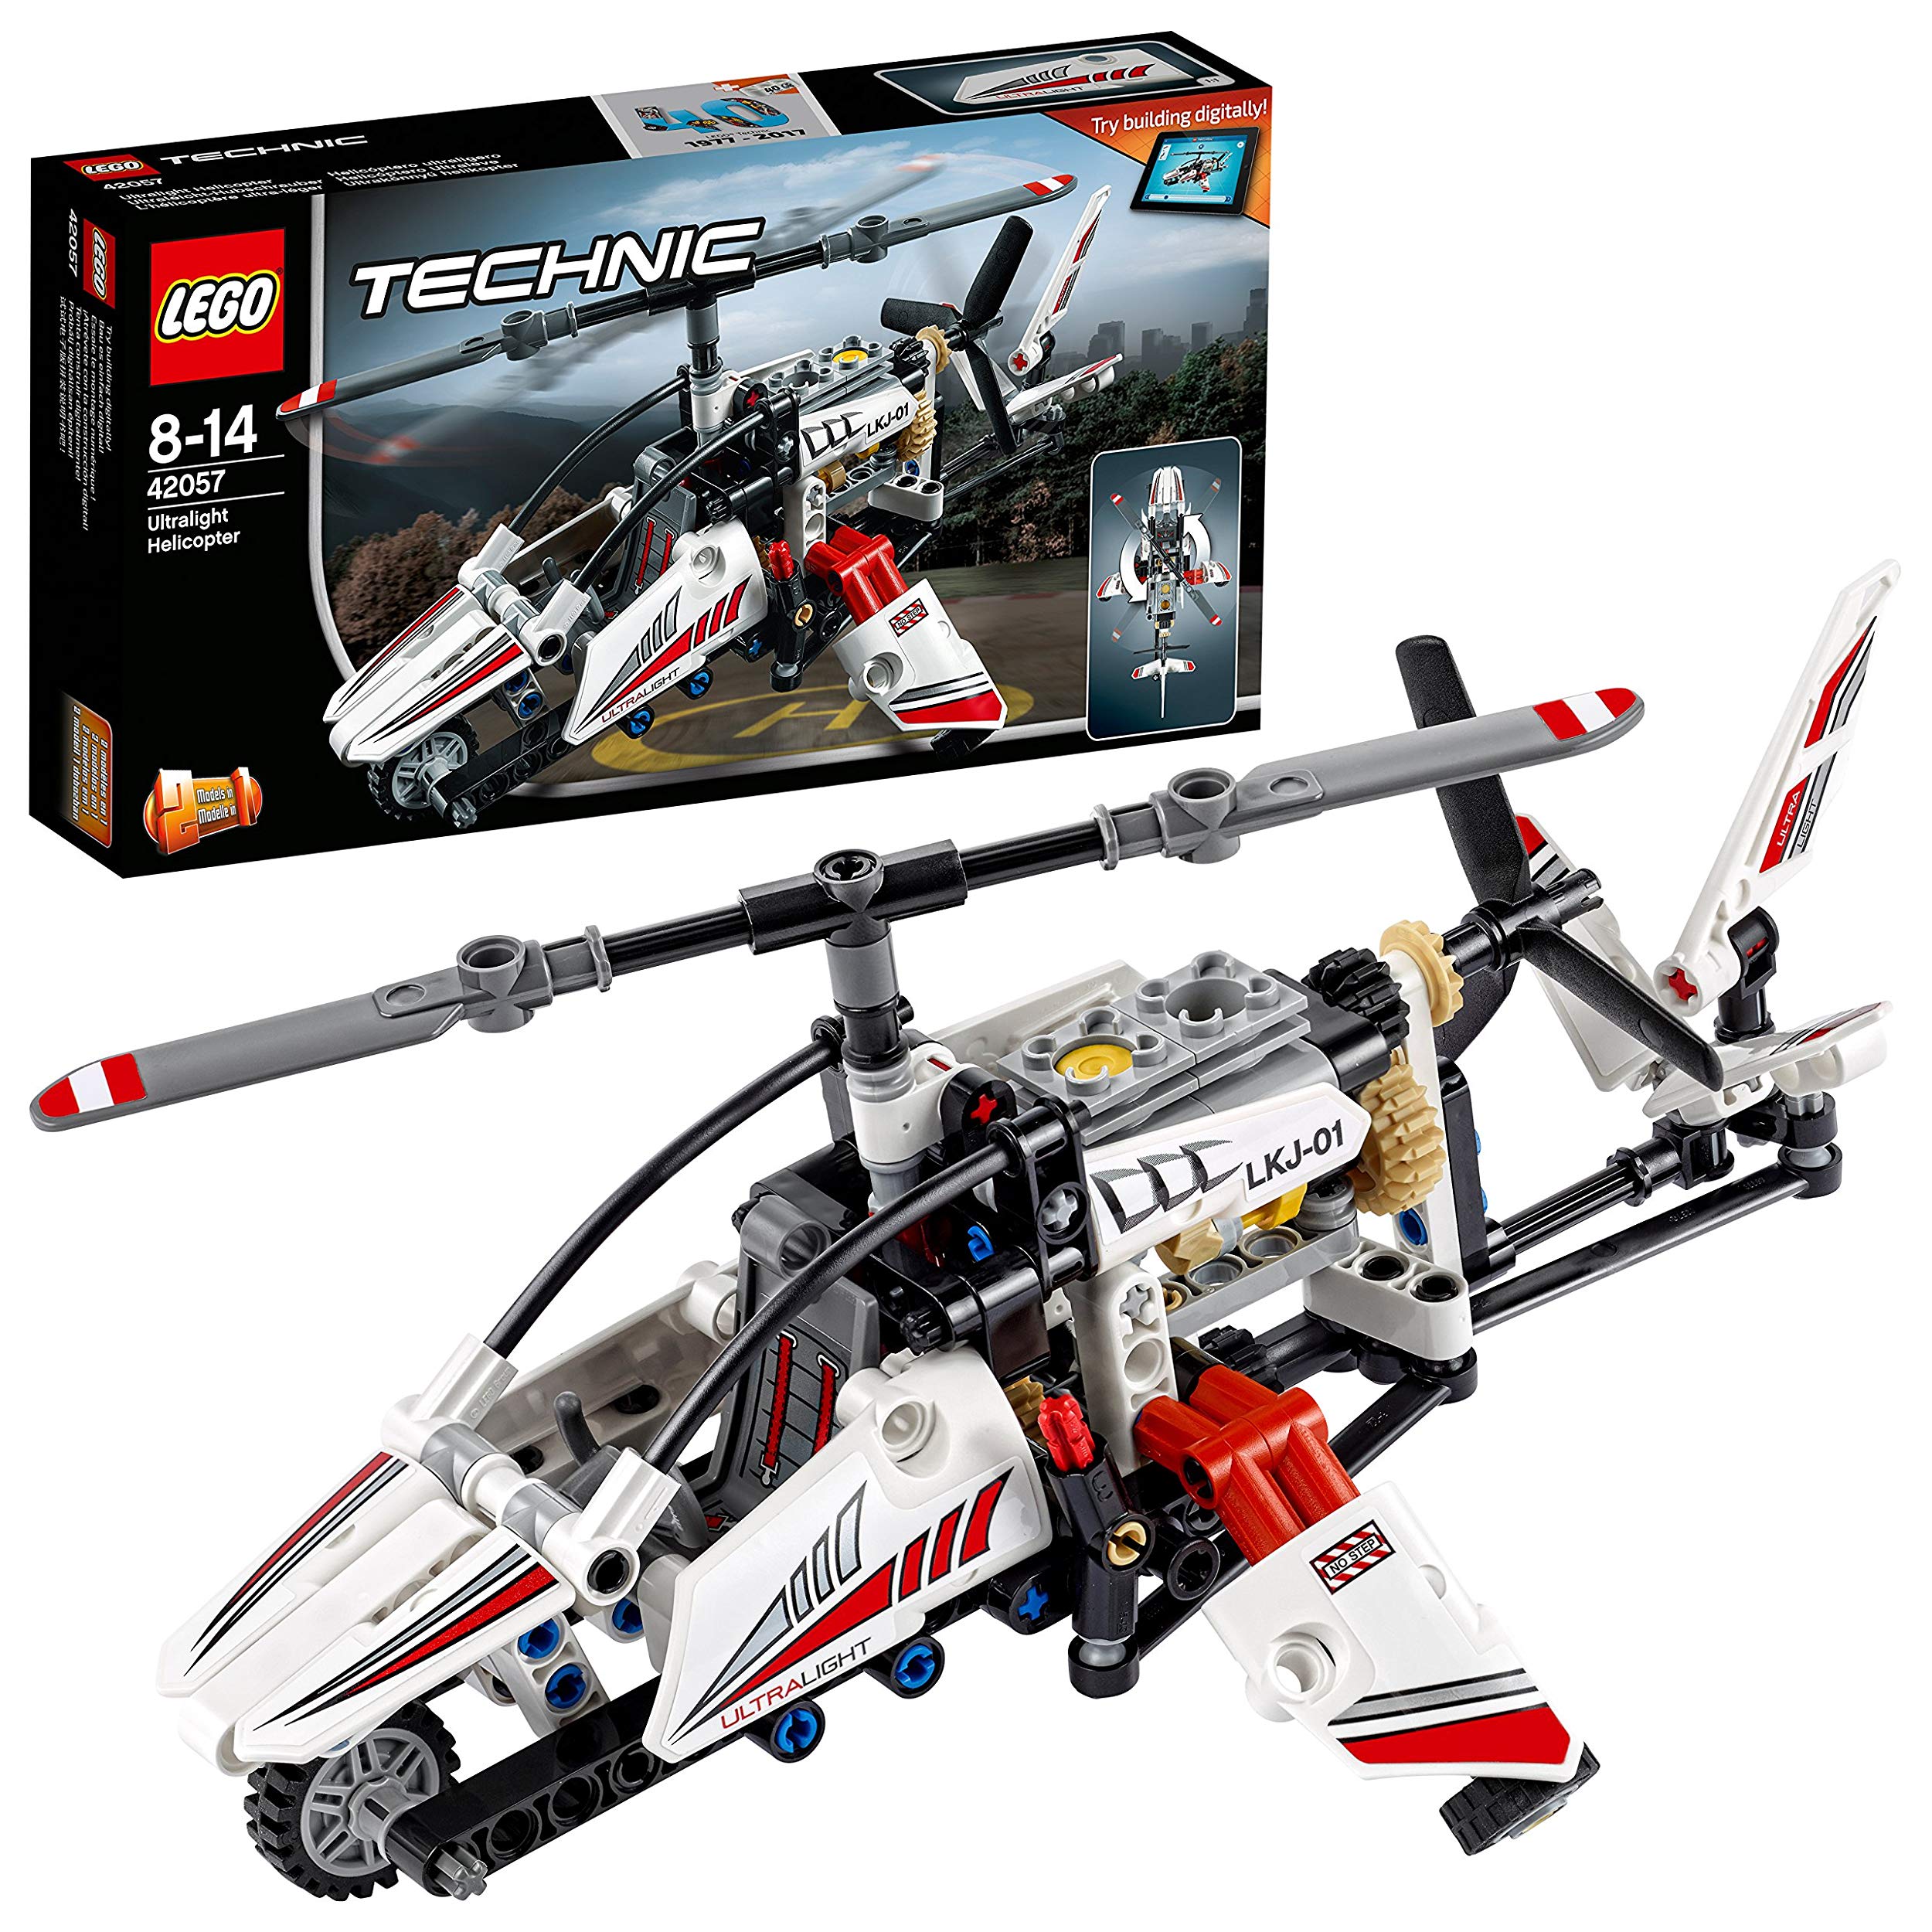 Lego Technic Ultralight Helicopter Advanced Bauset